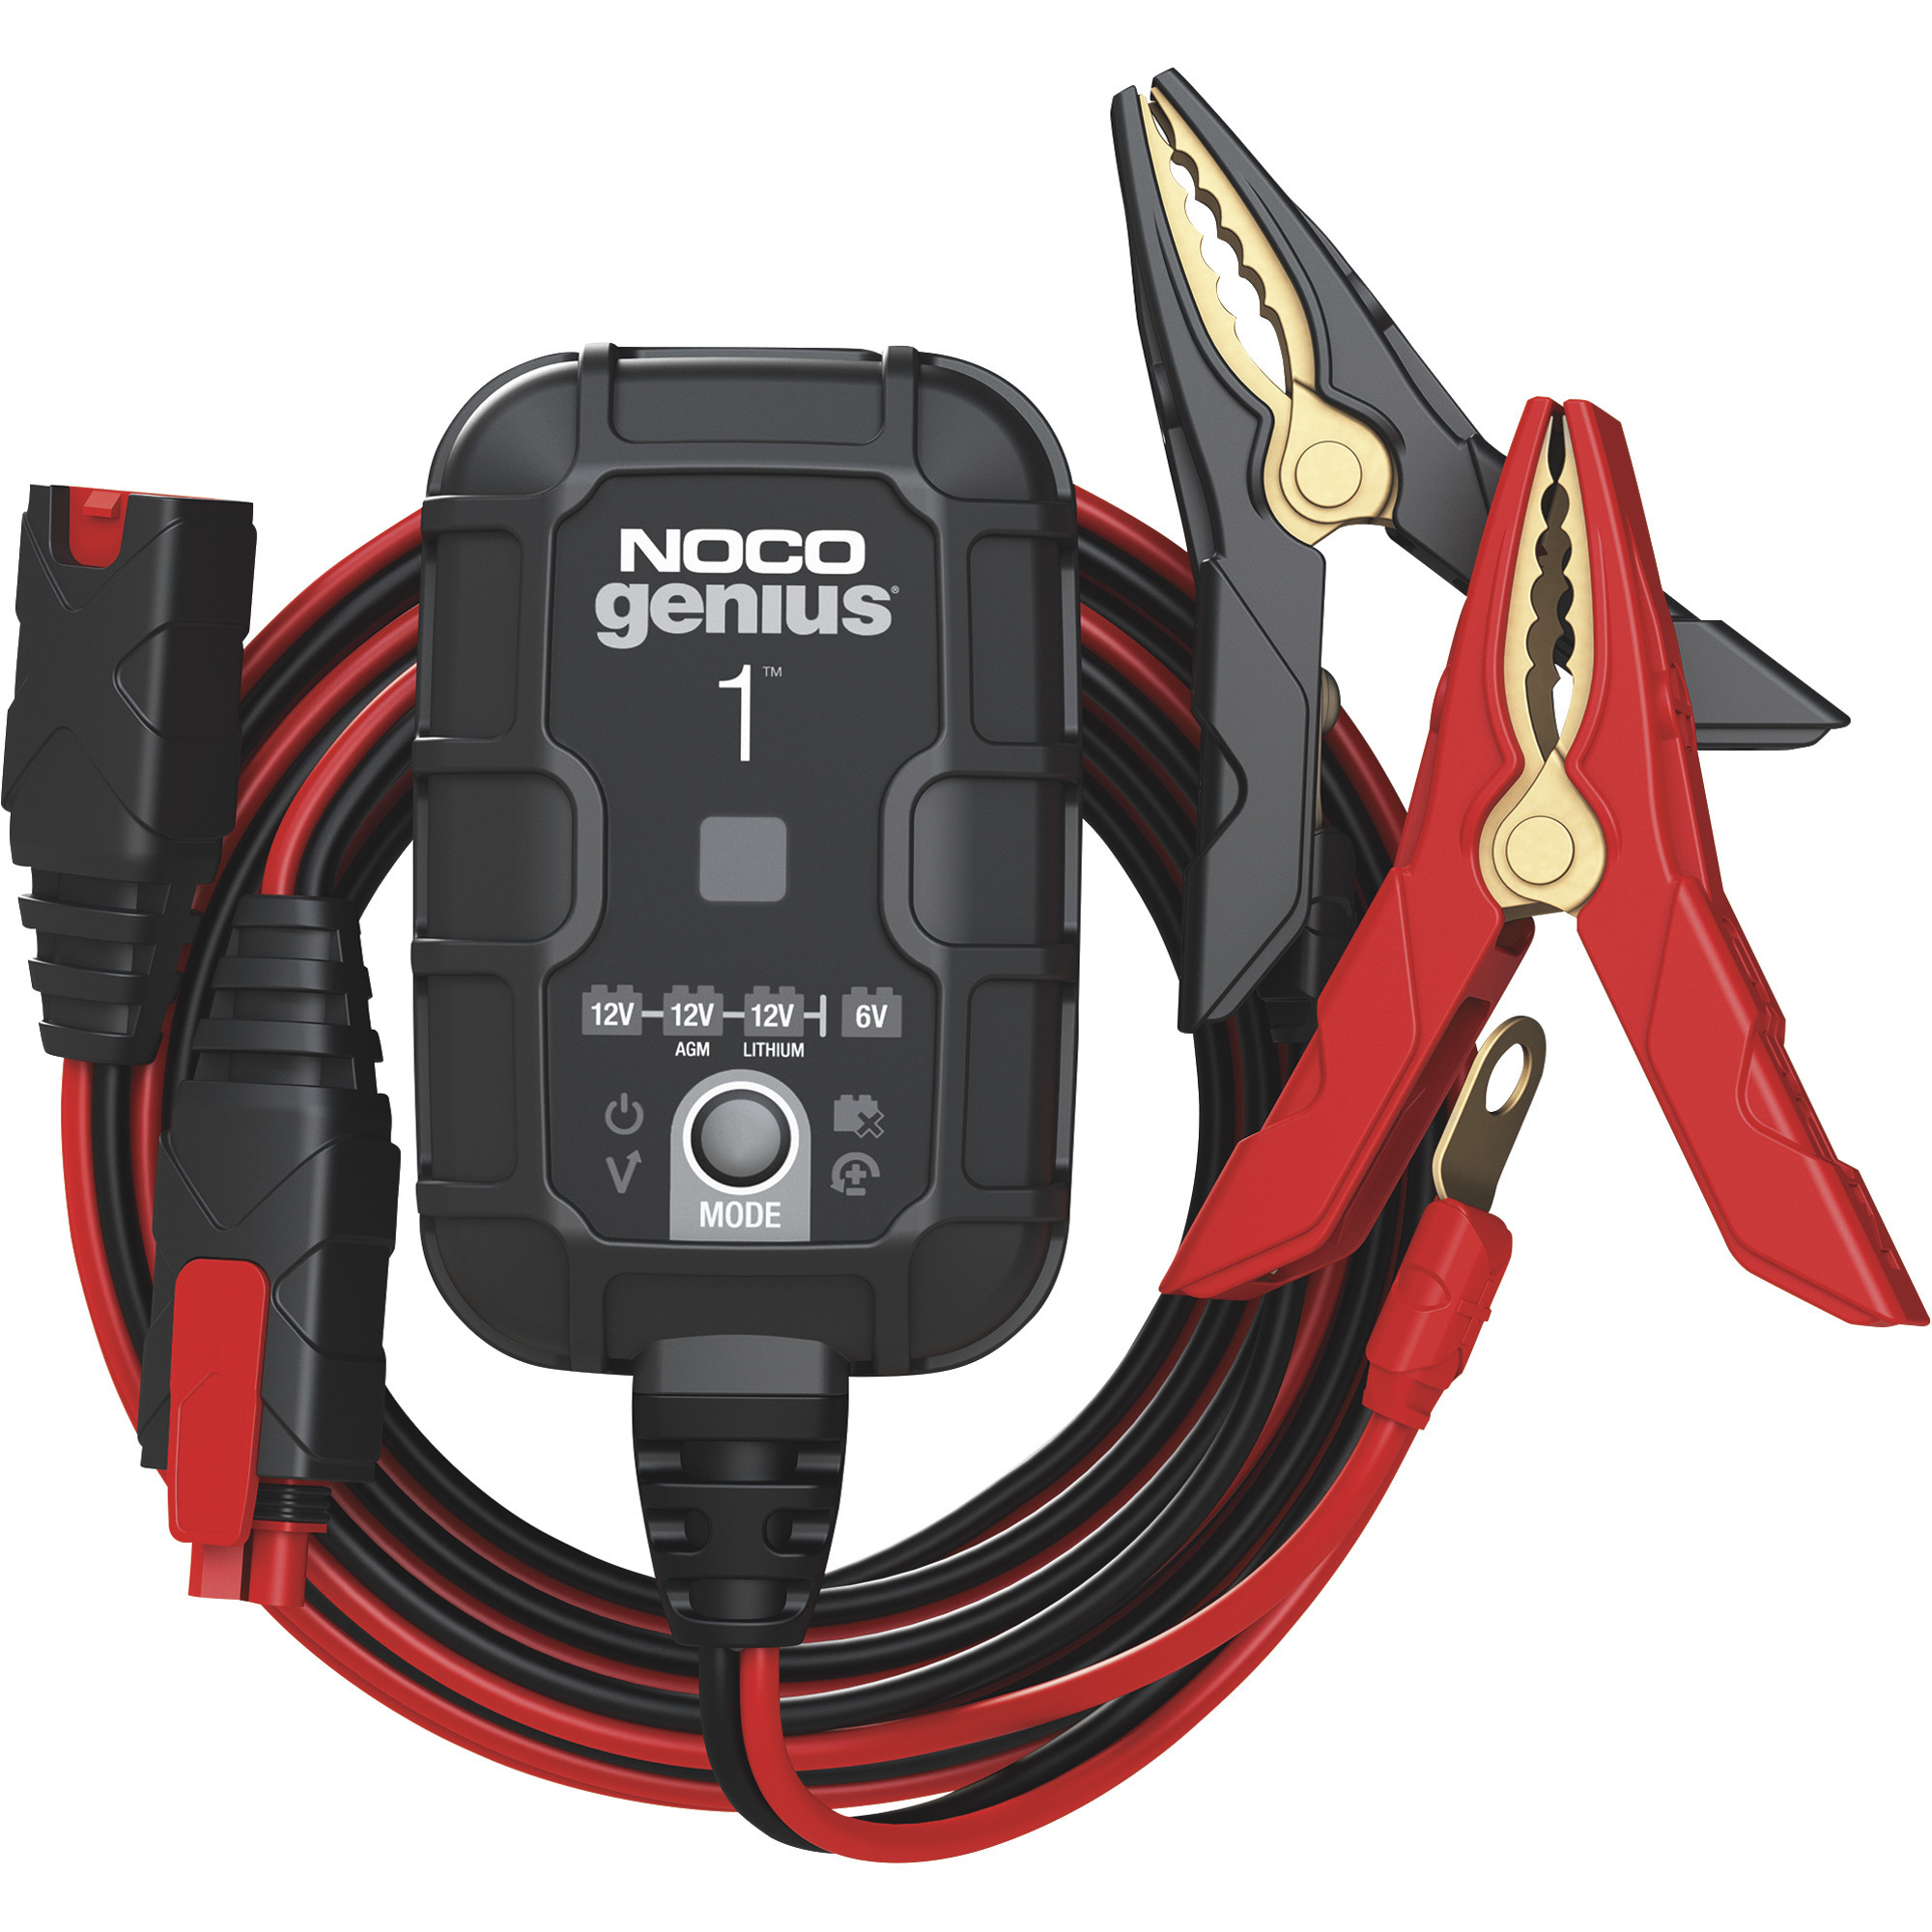 NOCO Genius1 Portable Automatic Battery Charger/Maintainer â 6/12 Volt, Model GENIUS1